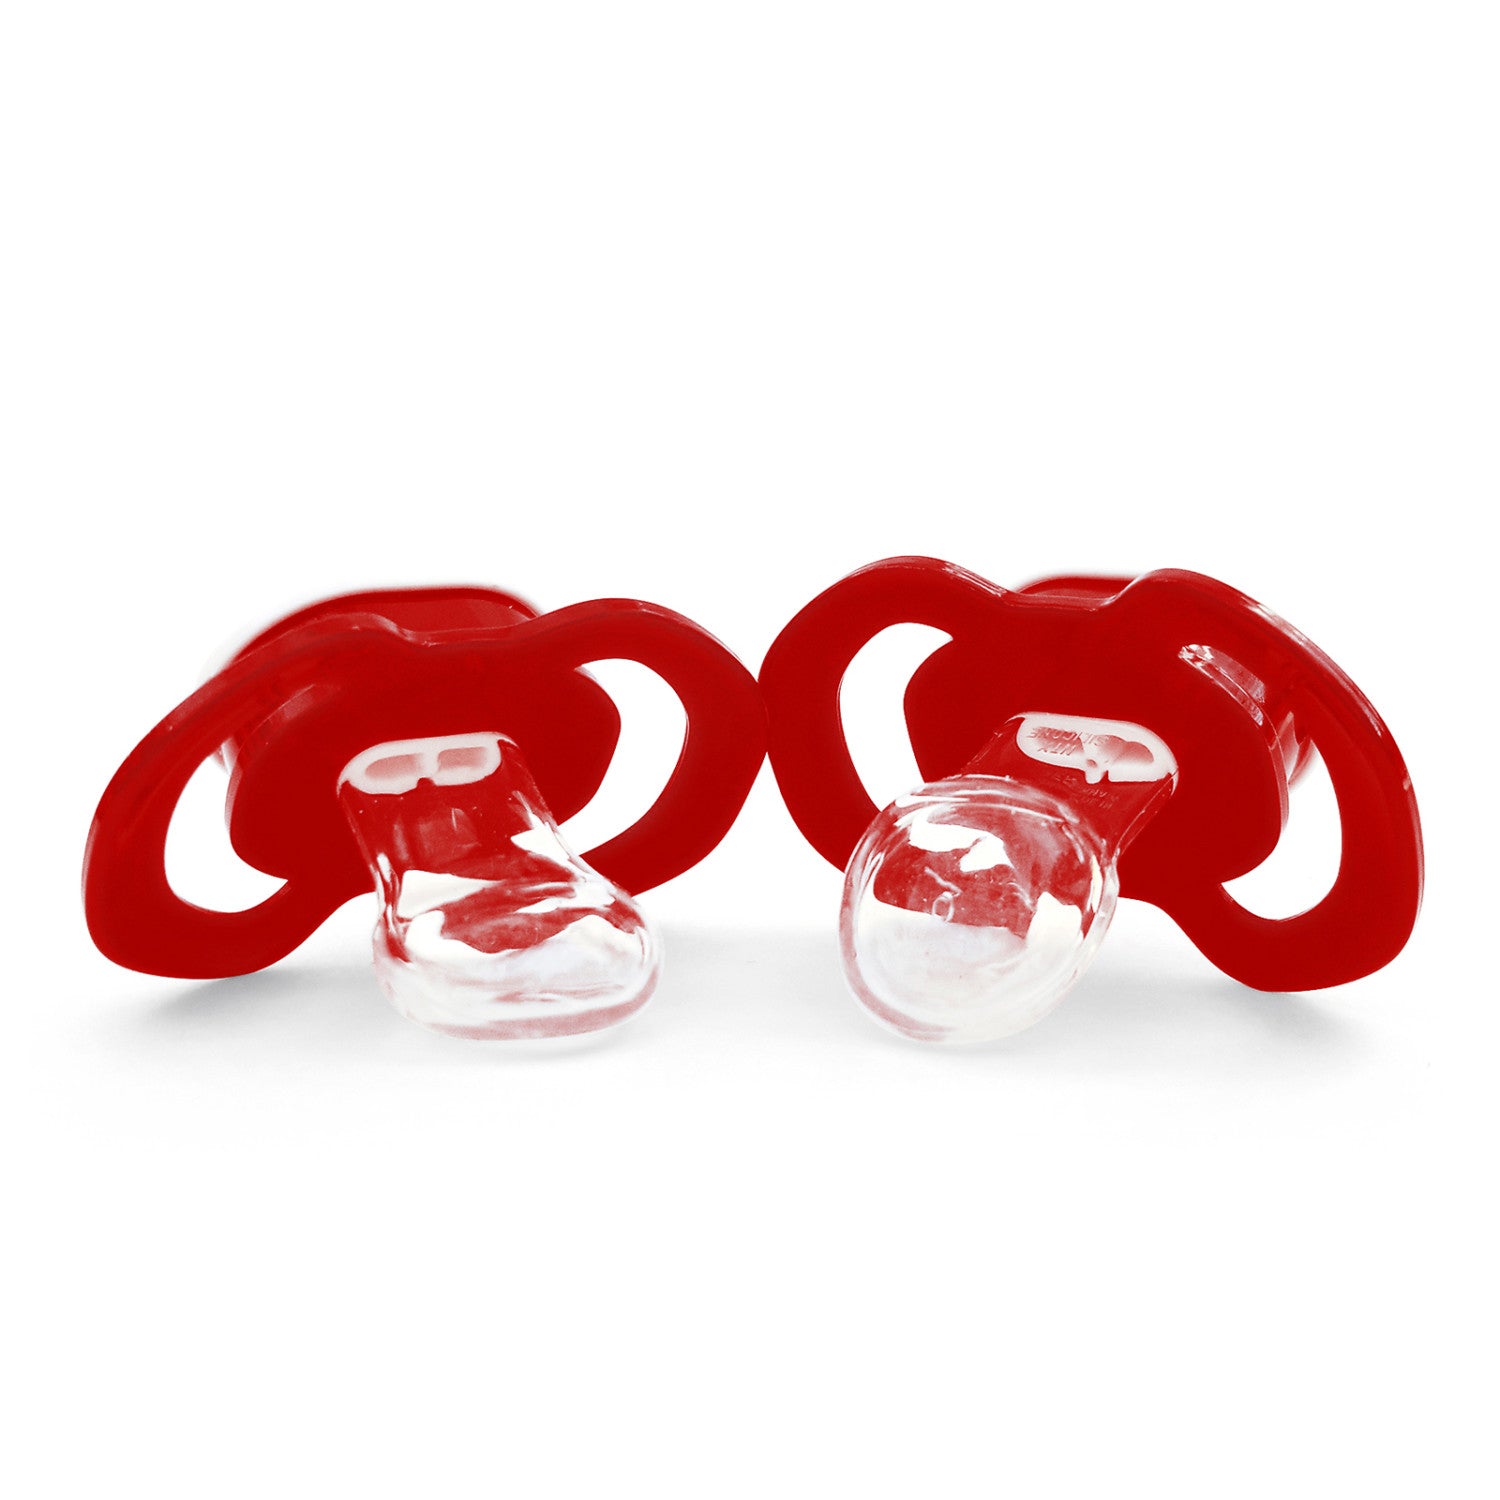 Texas Tech Red Raiders - Pacifier 2-Pack